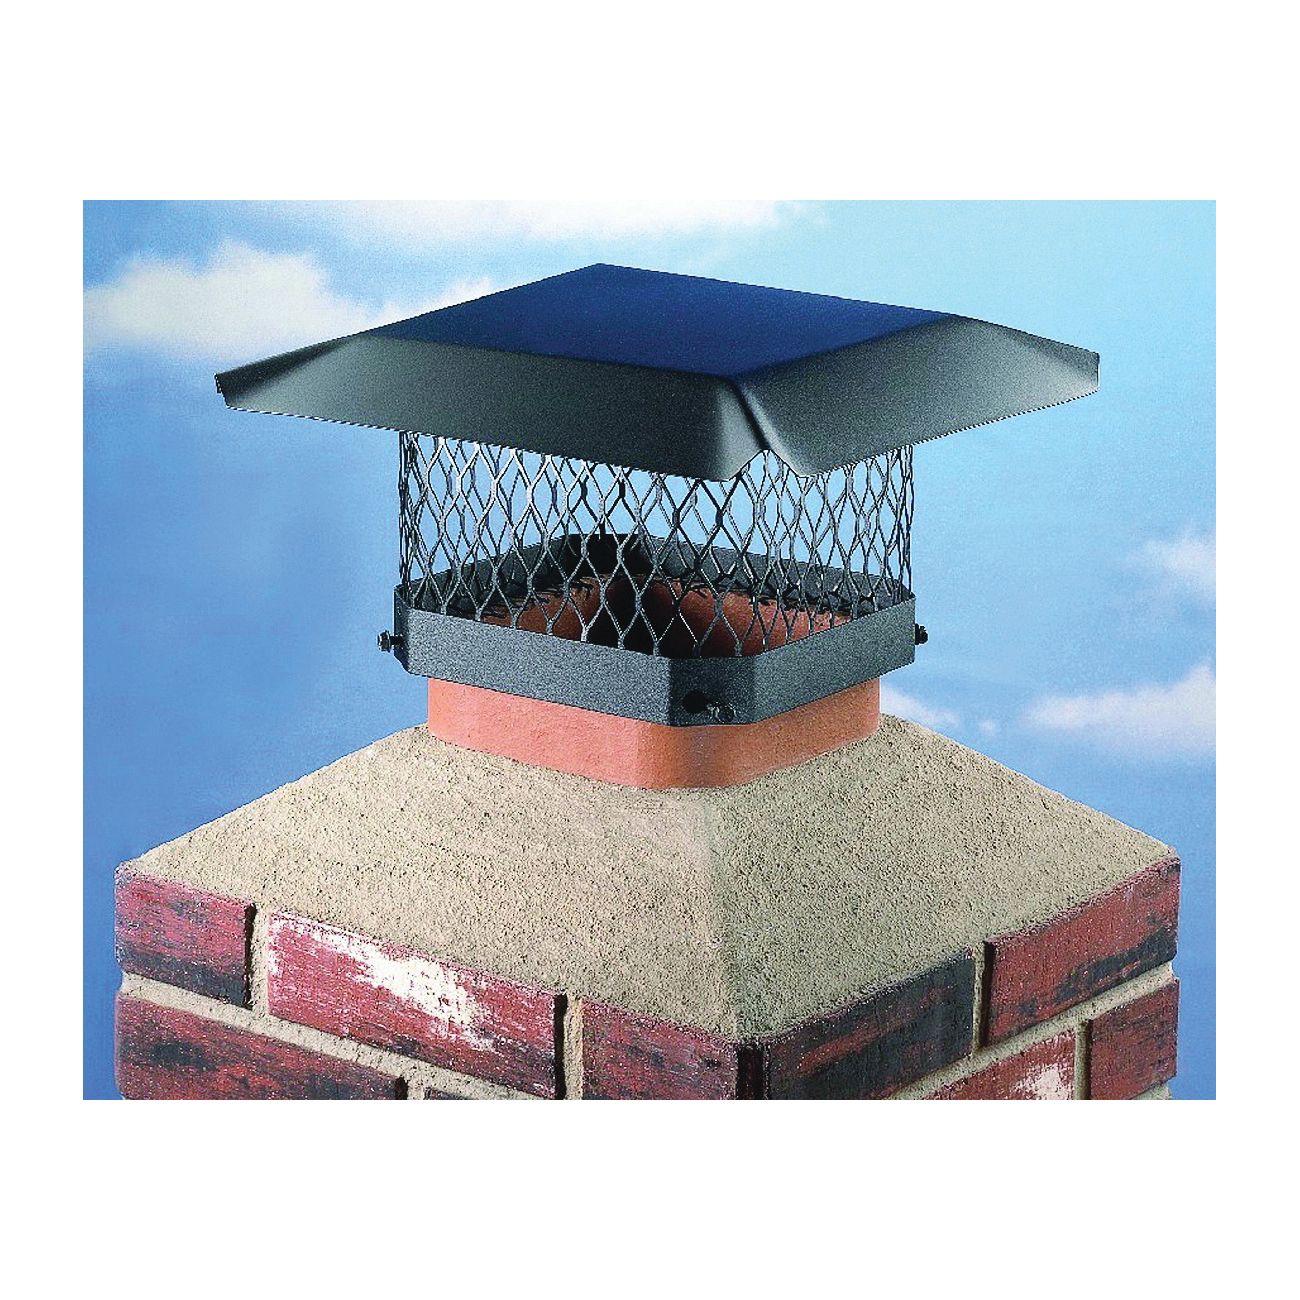 SC913 Shelter Chimney Cap, Steel, Black, Powder-Coated, Fits Duct Size: 7-1/2 x 11-1/2 to 9-1/2 x 13-1/2 in